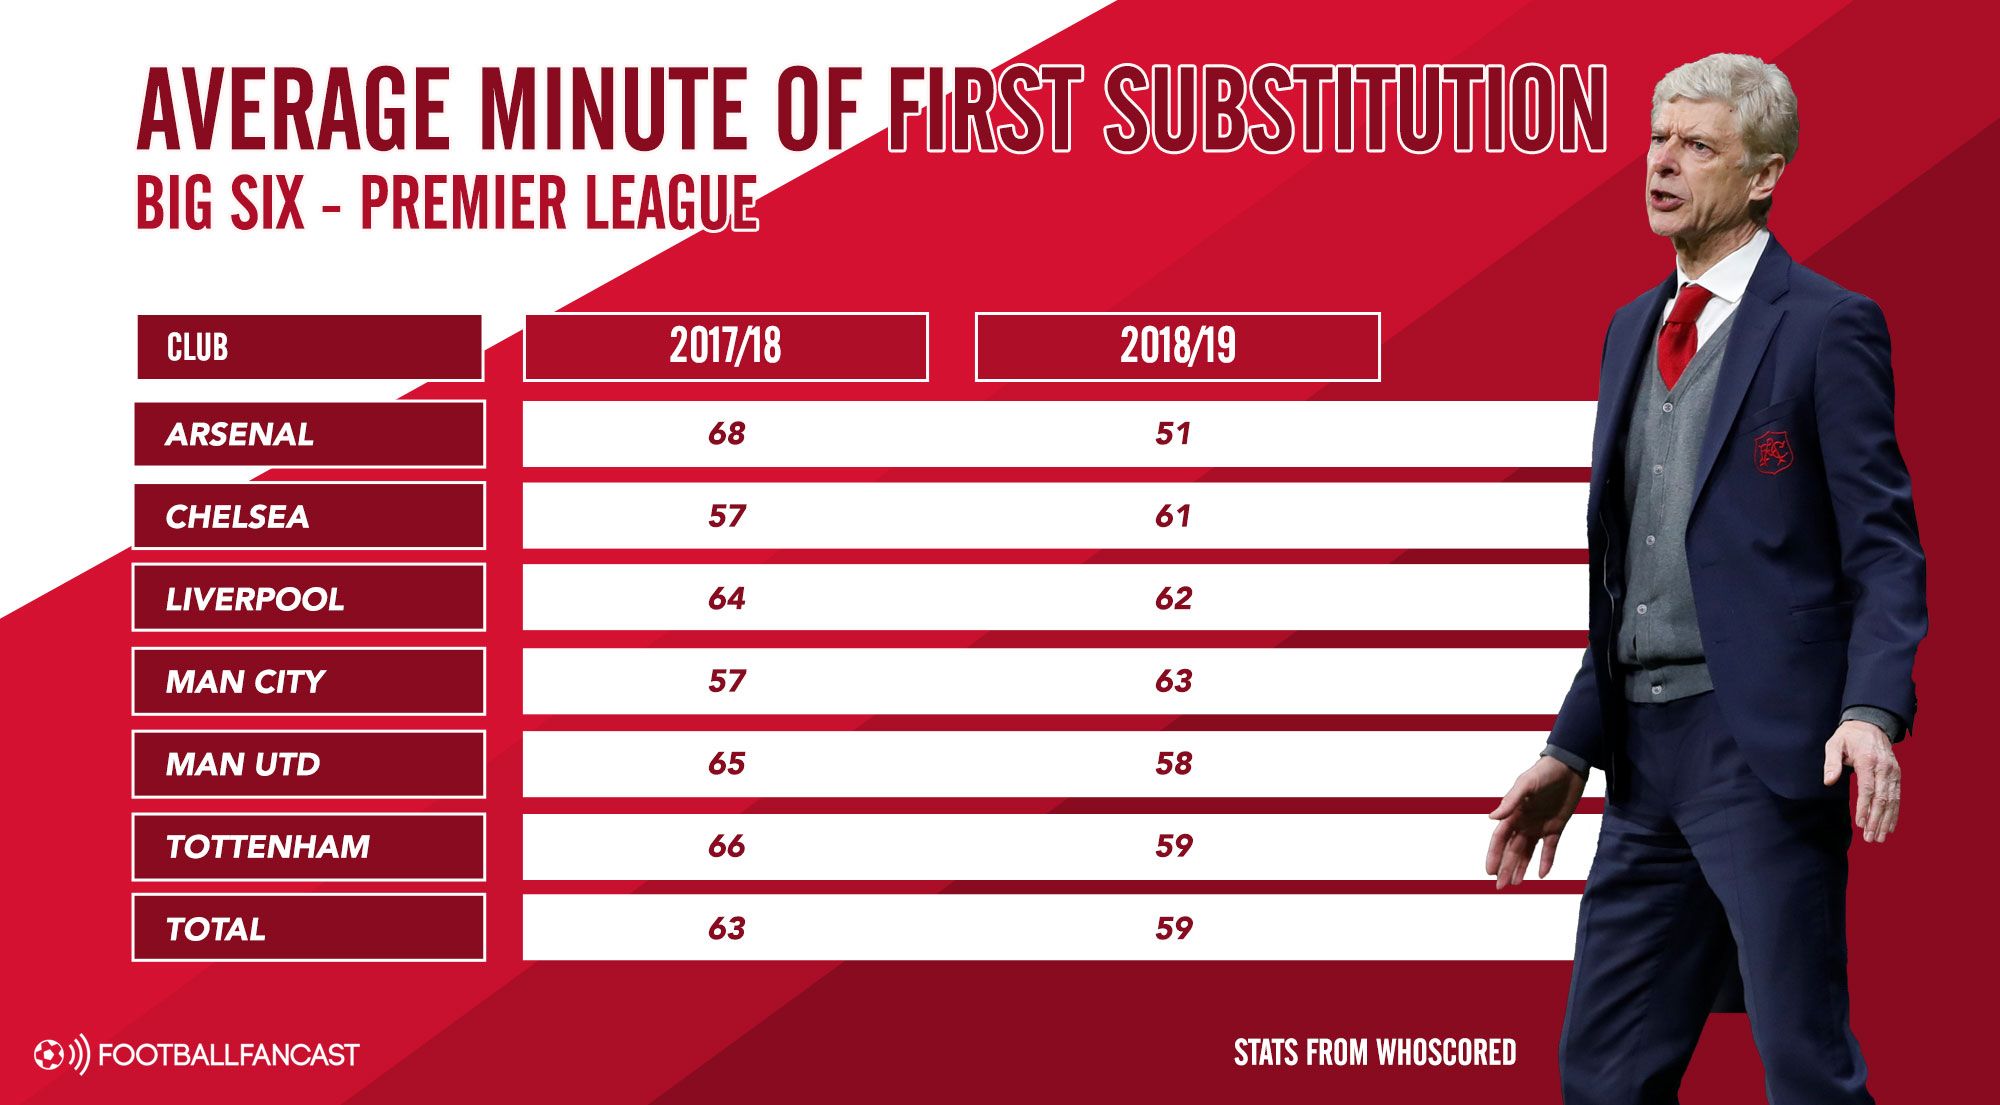 Average minute of first substitution